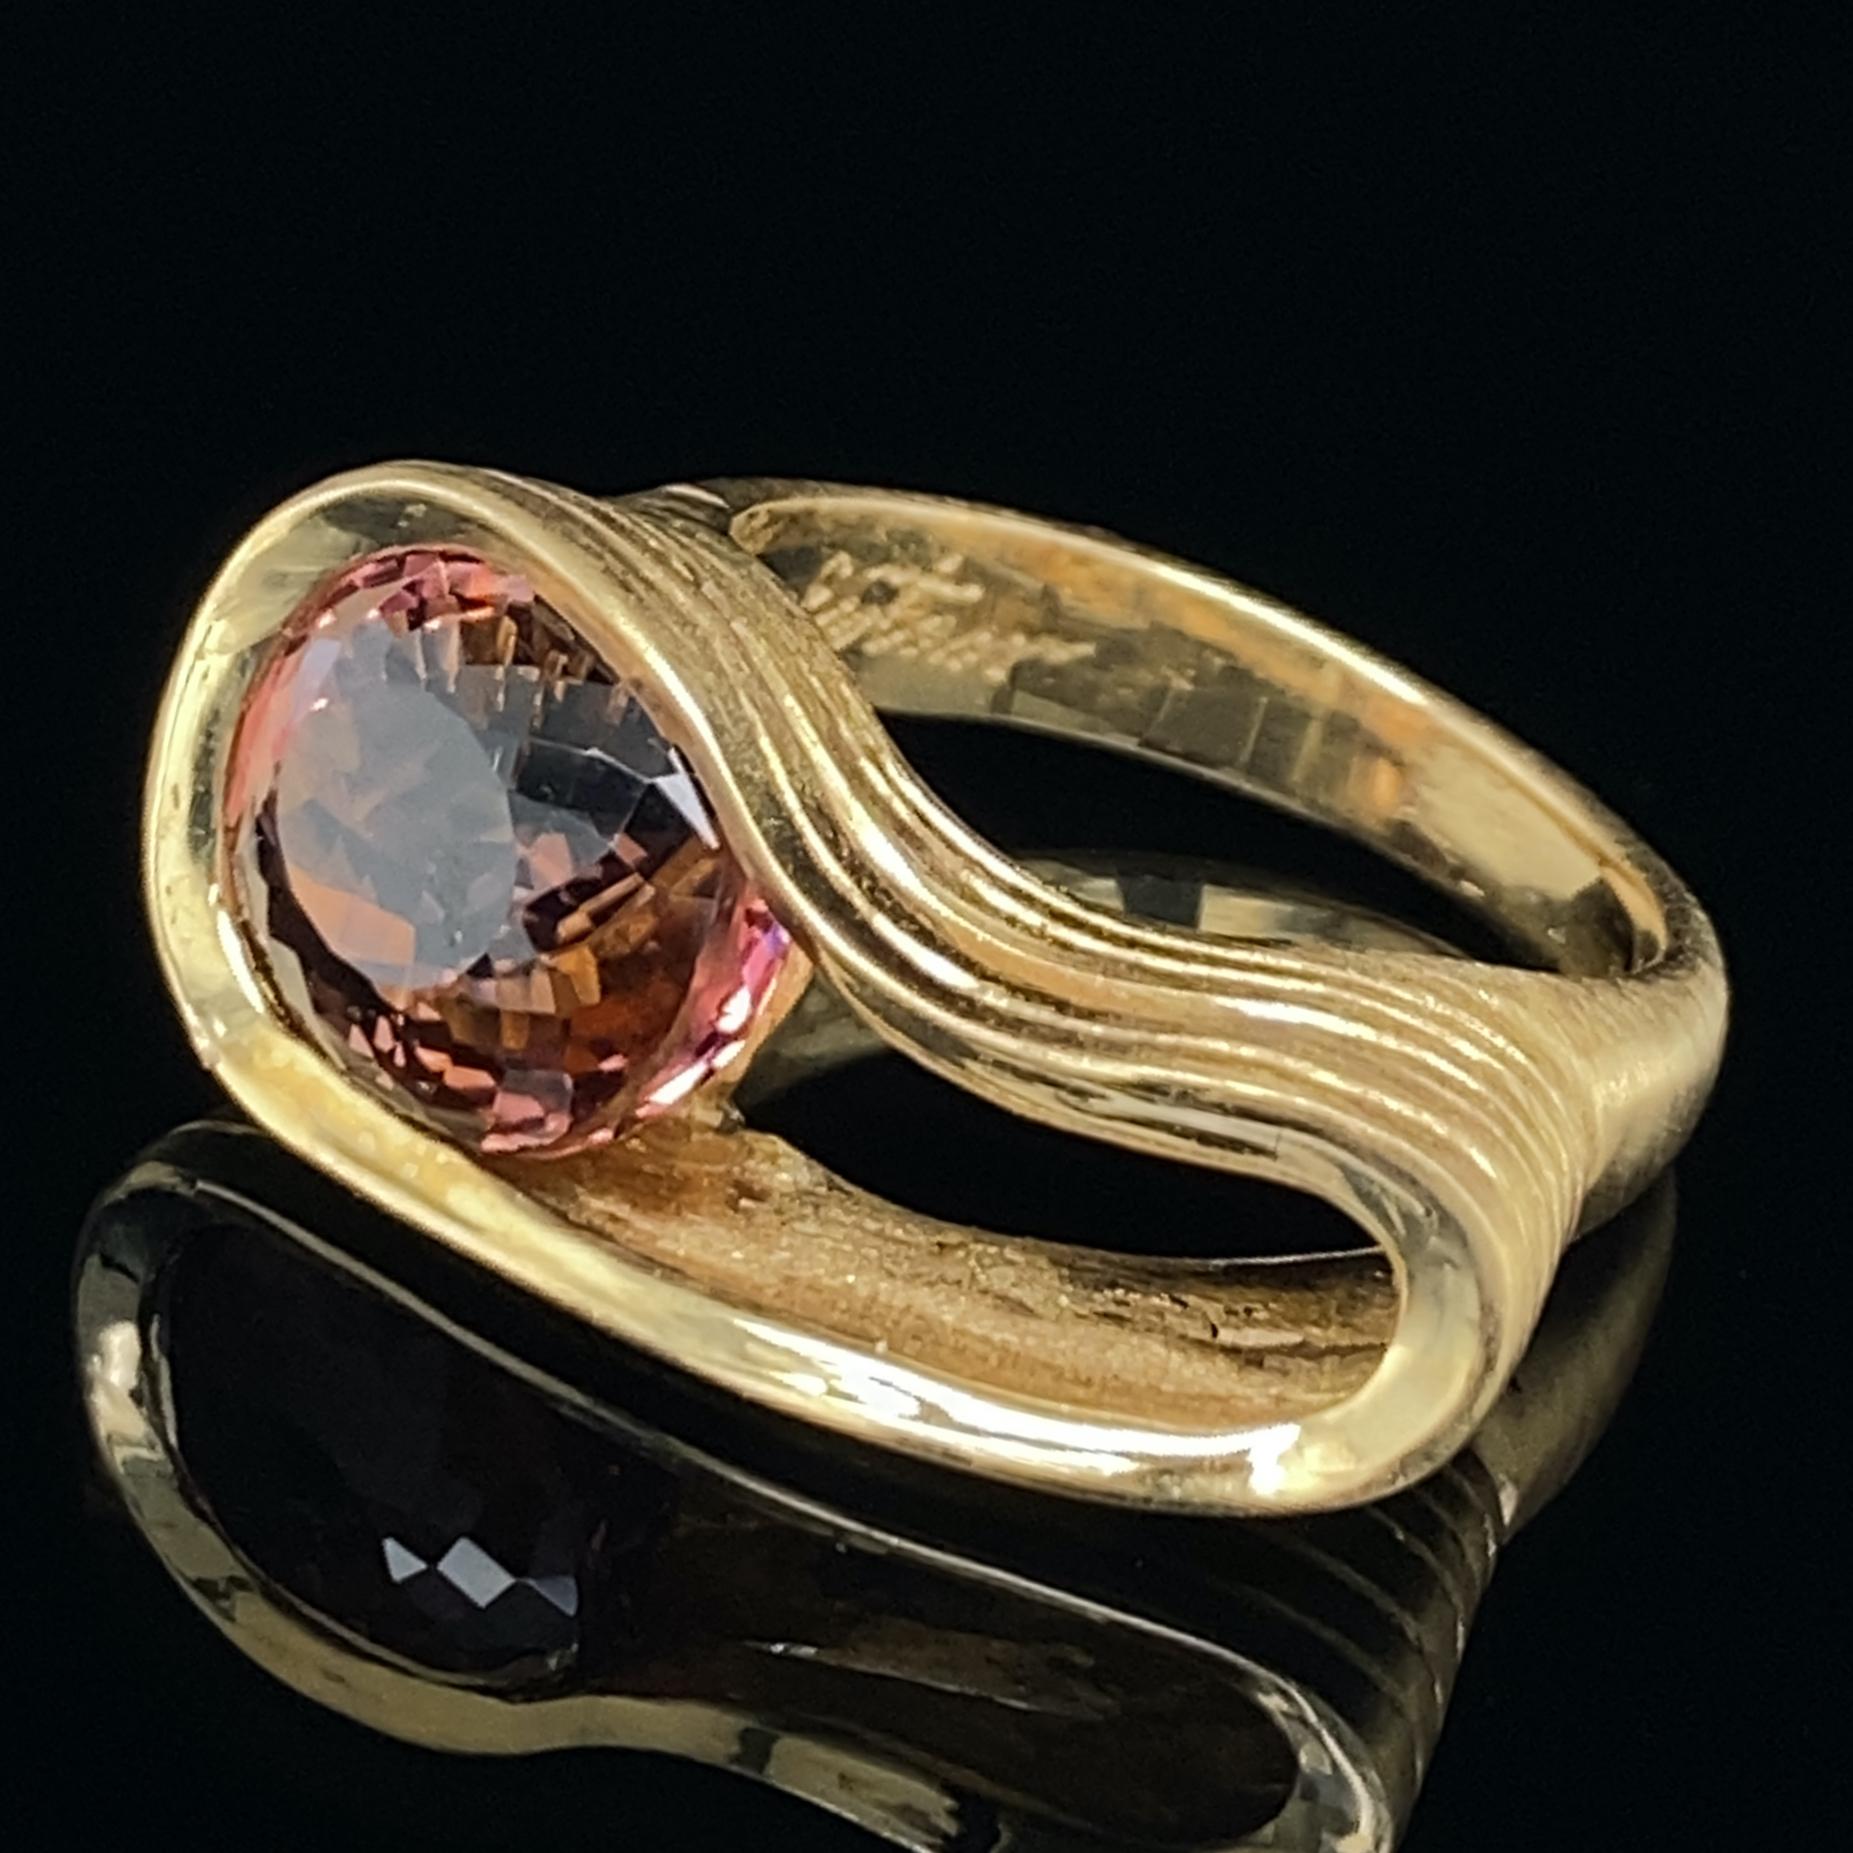 This gorgeous, freeform ring in satiny 18 karat yellow gold by Eytan Brandes features a 6.3 carat pink tourmaline with a luscious brown undertone.  

The mixed cut, oval-shaped tourmaline is from Mozambique.  This stone, including that amazing